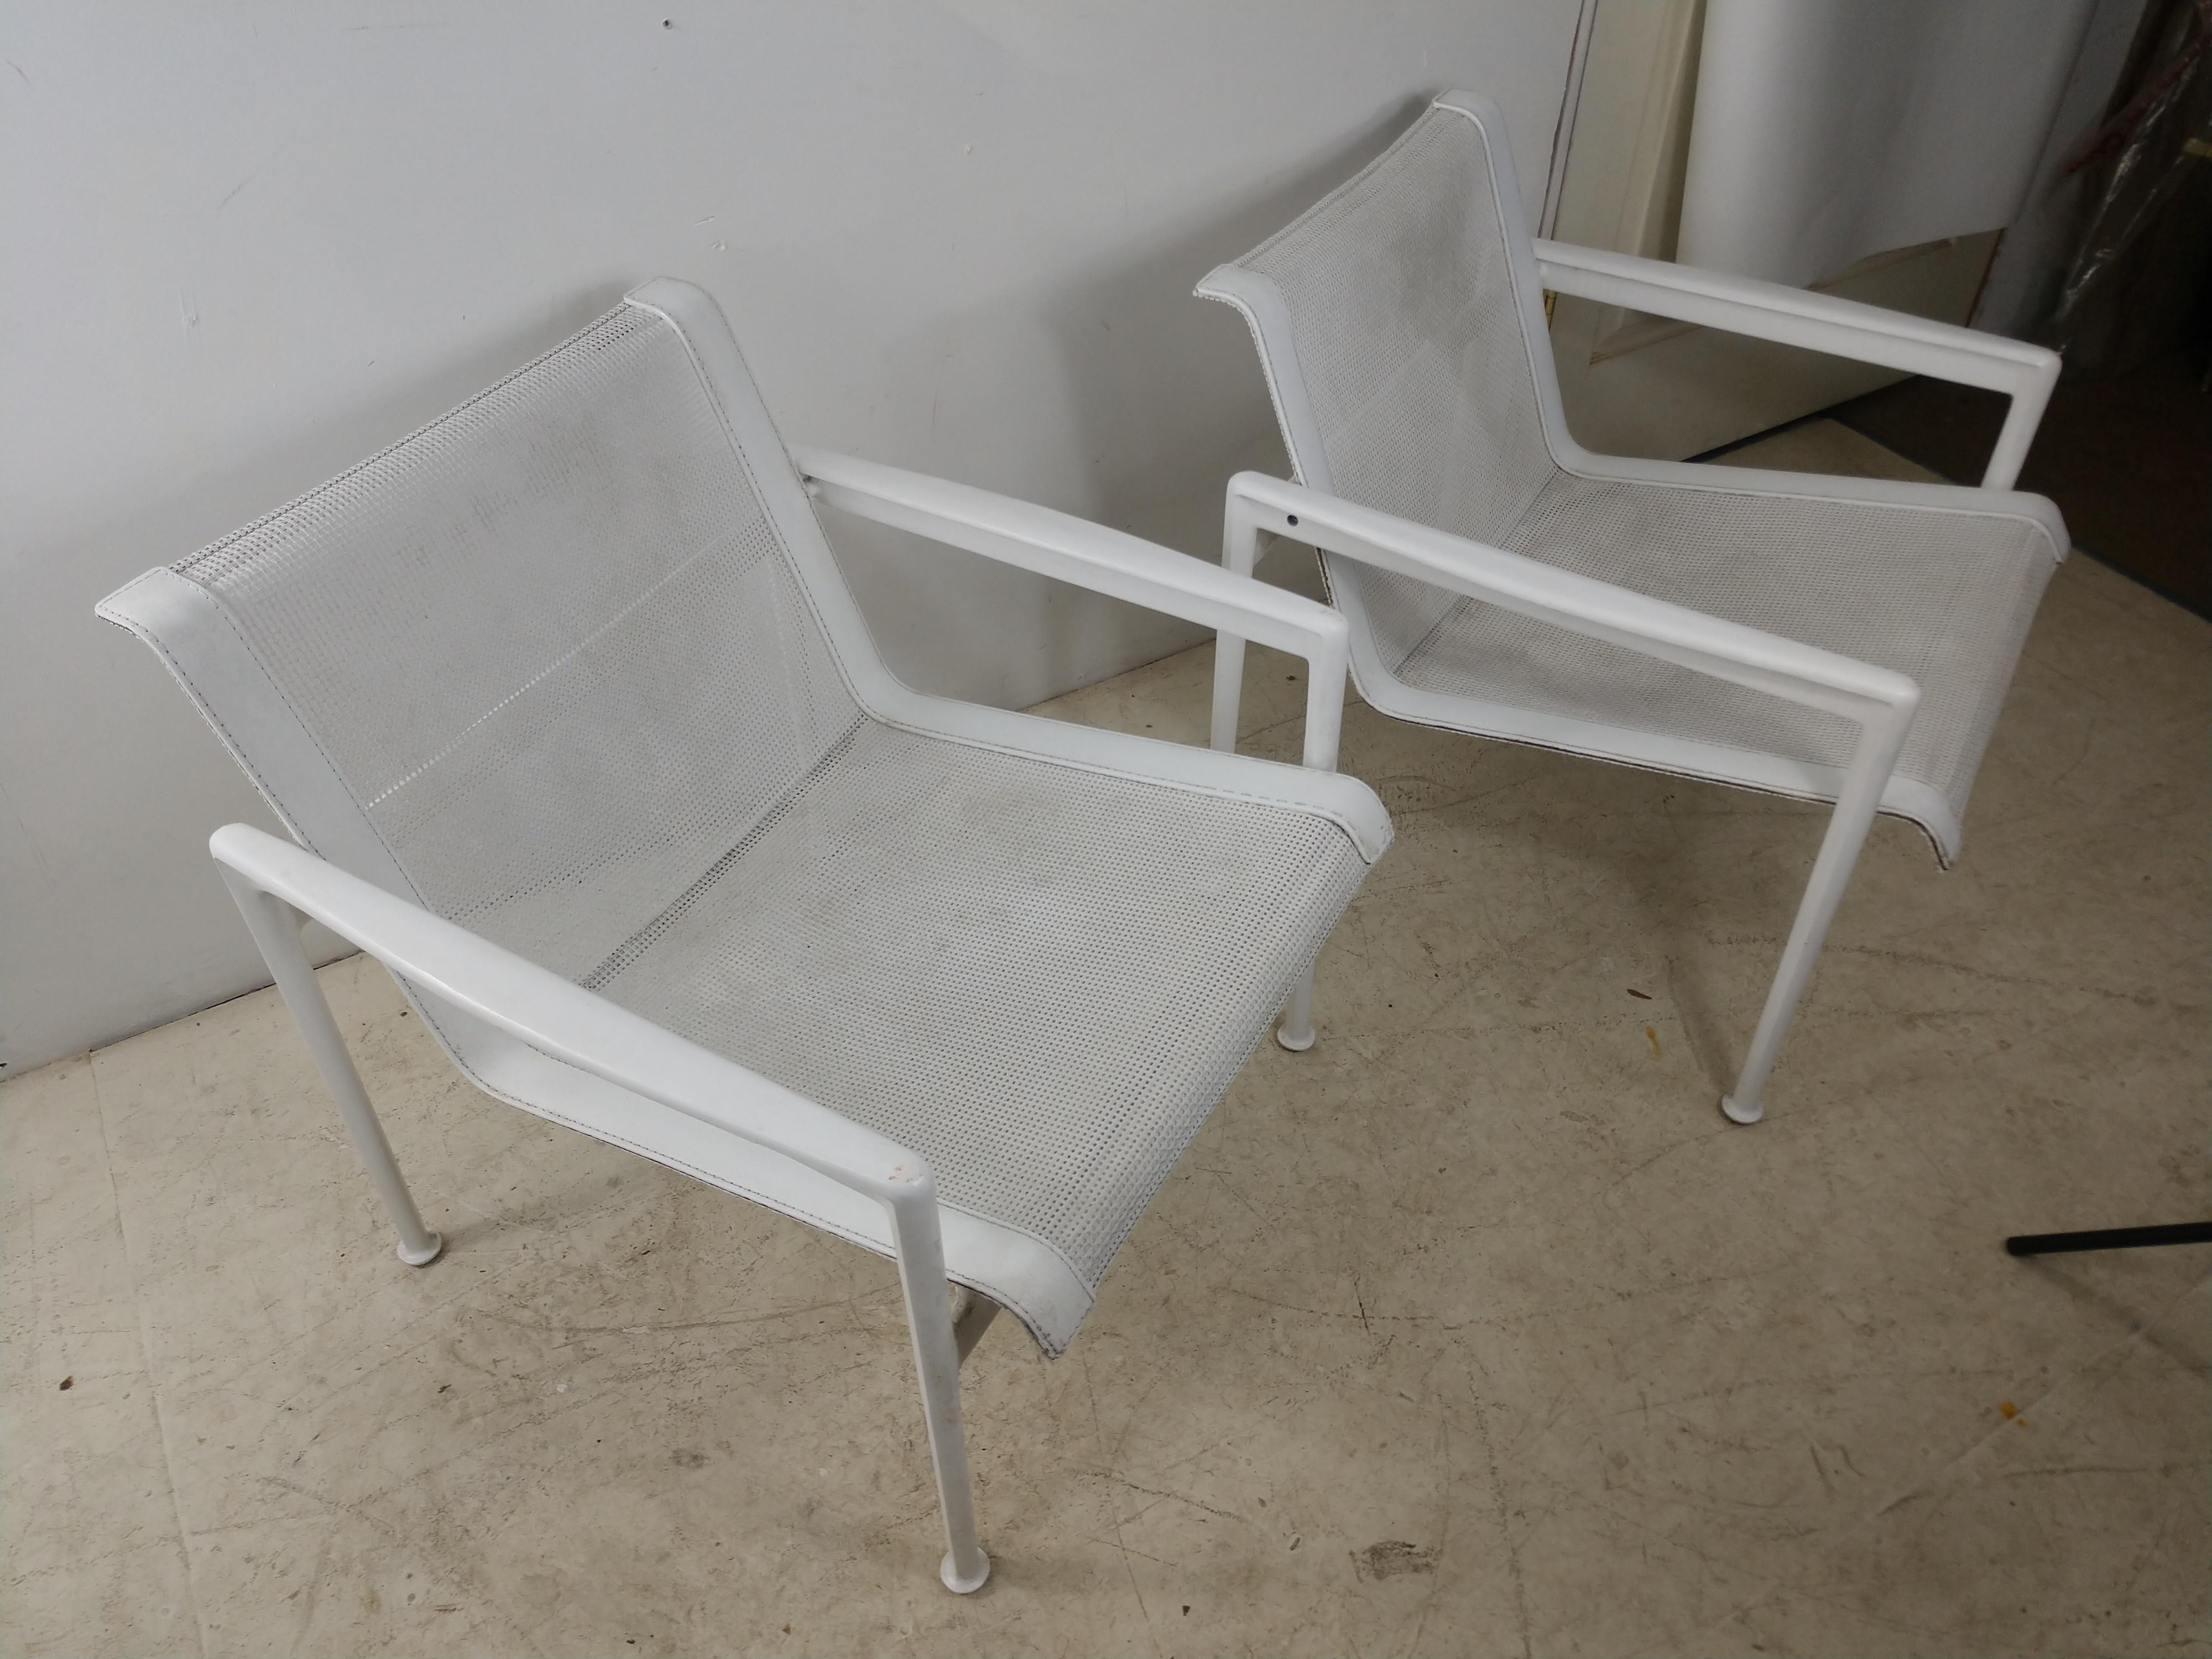 Fabulous pair of lounge chairs by Richard Schultz for Knoll in white leather and coated aluminum with nylon mesh seats. Chairs are from mid-1970s. And in great vintage condition with minimal wear. Sold as a pair, priced individually. Seat height is